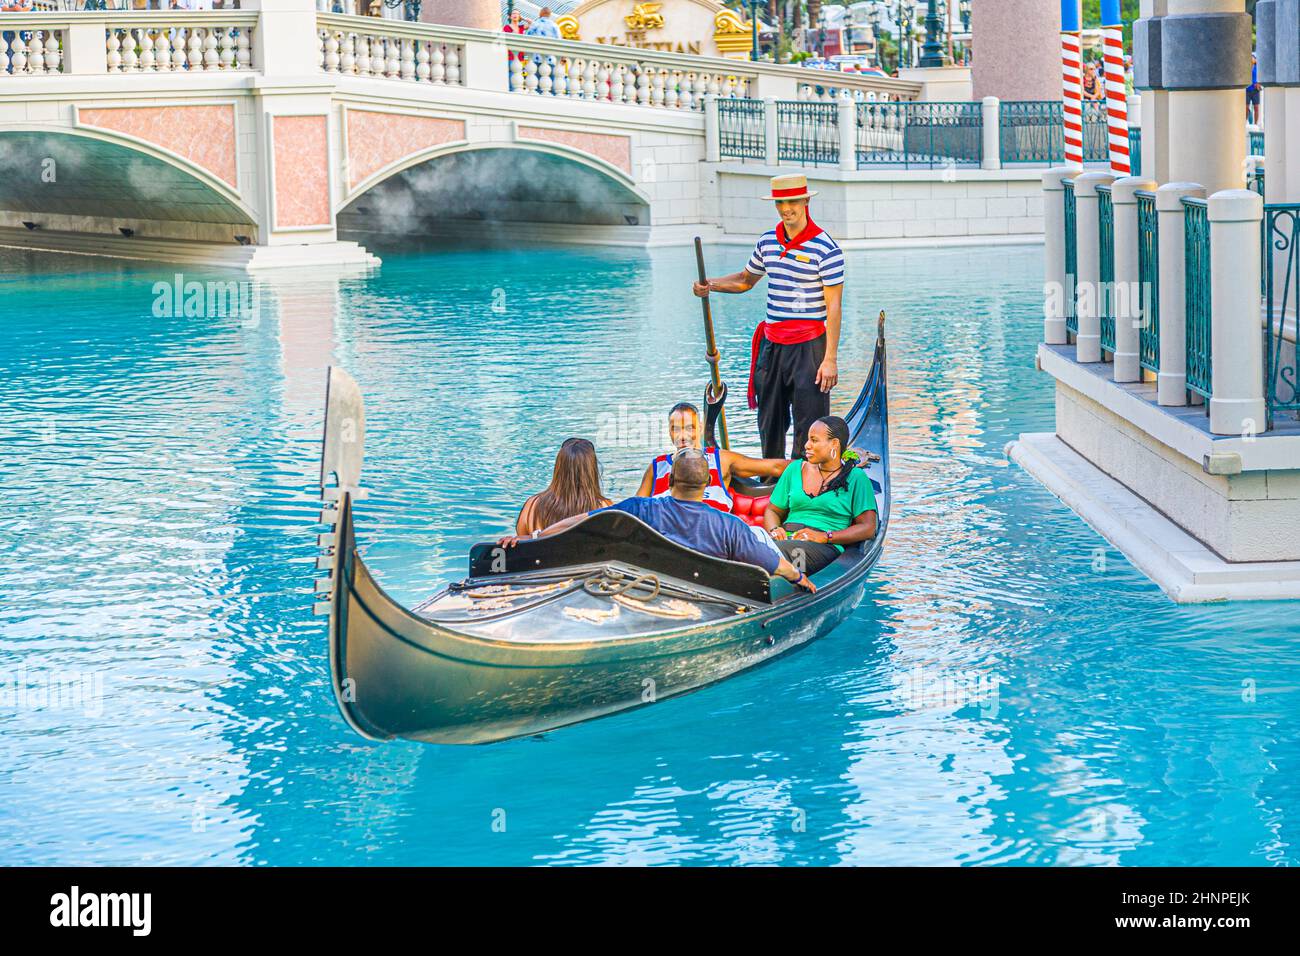 gondola with tourists at The Venetian Resort Hotel & Casino The resort opened  1999 with flutter of white doves, sounding trumpets, singing gondoliers and actress Sophia Loren. Stock Photo